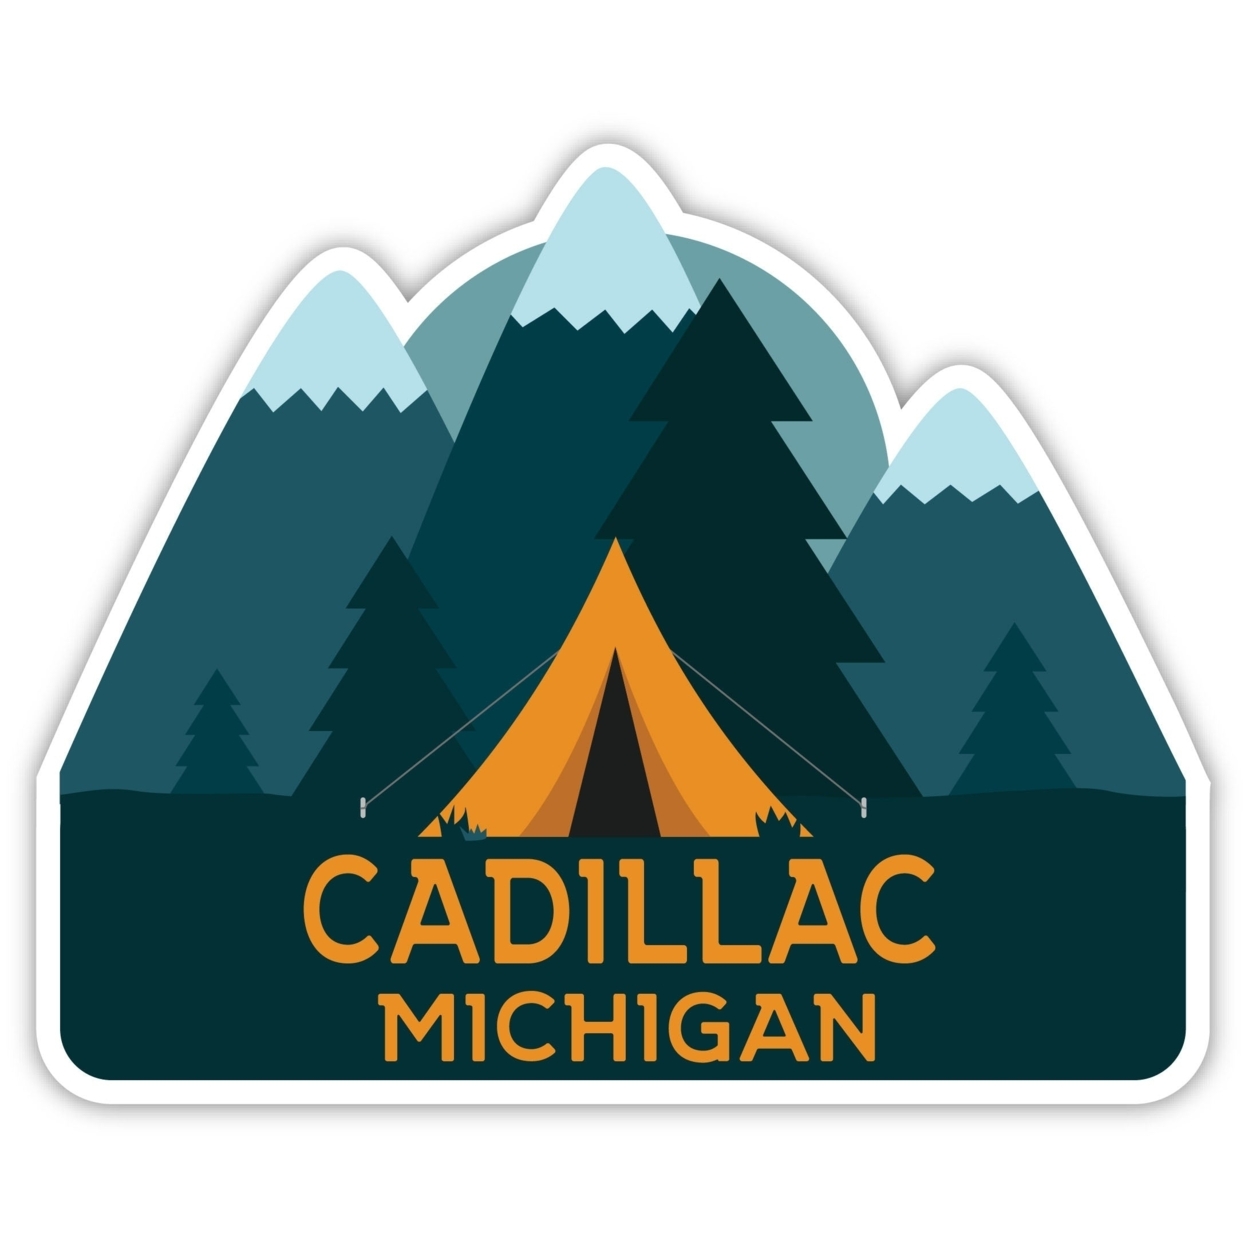 Cadillac Michigan Souvenir Decorative Stickers (Choose Theme And Size) - 4-Pack, 4-Inch, Tent